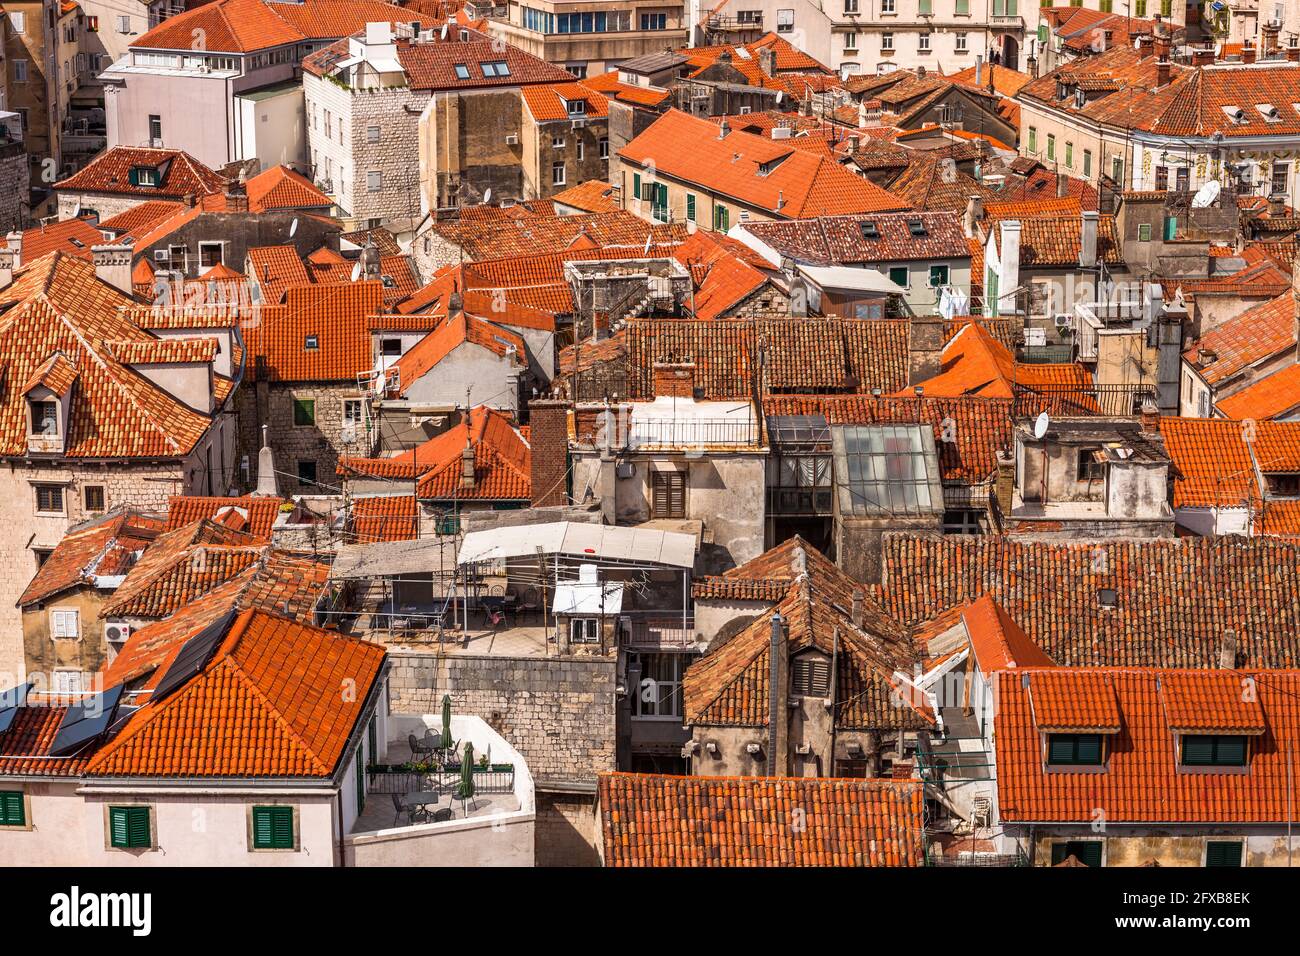 Red tiled neighborhood in the old town section of Split, Croatia, as seen from atop the bell tower of the Cathedral of Saint Domnius. Croatia Stock Photo